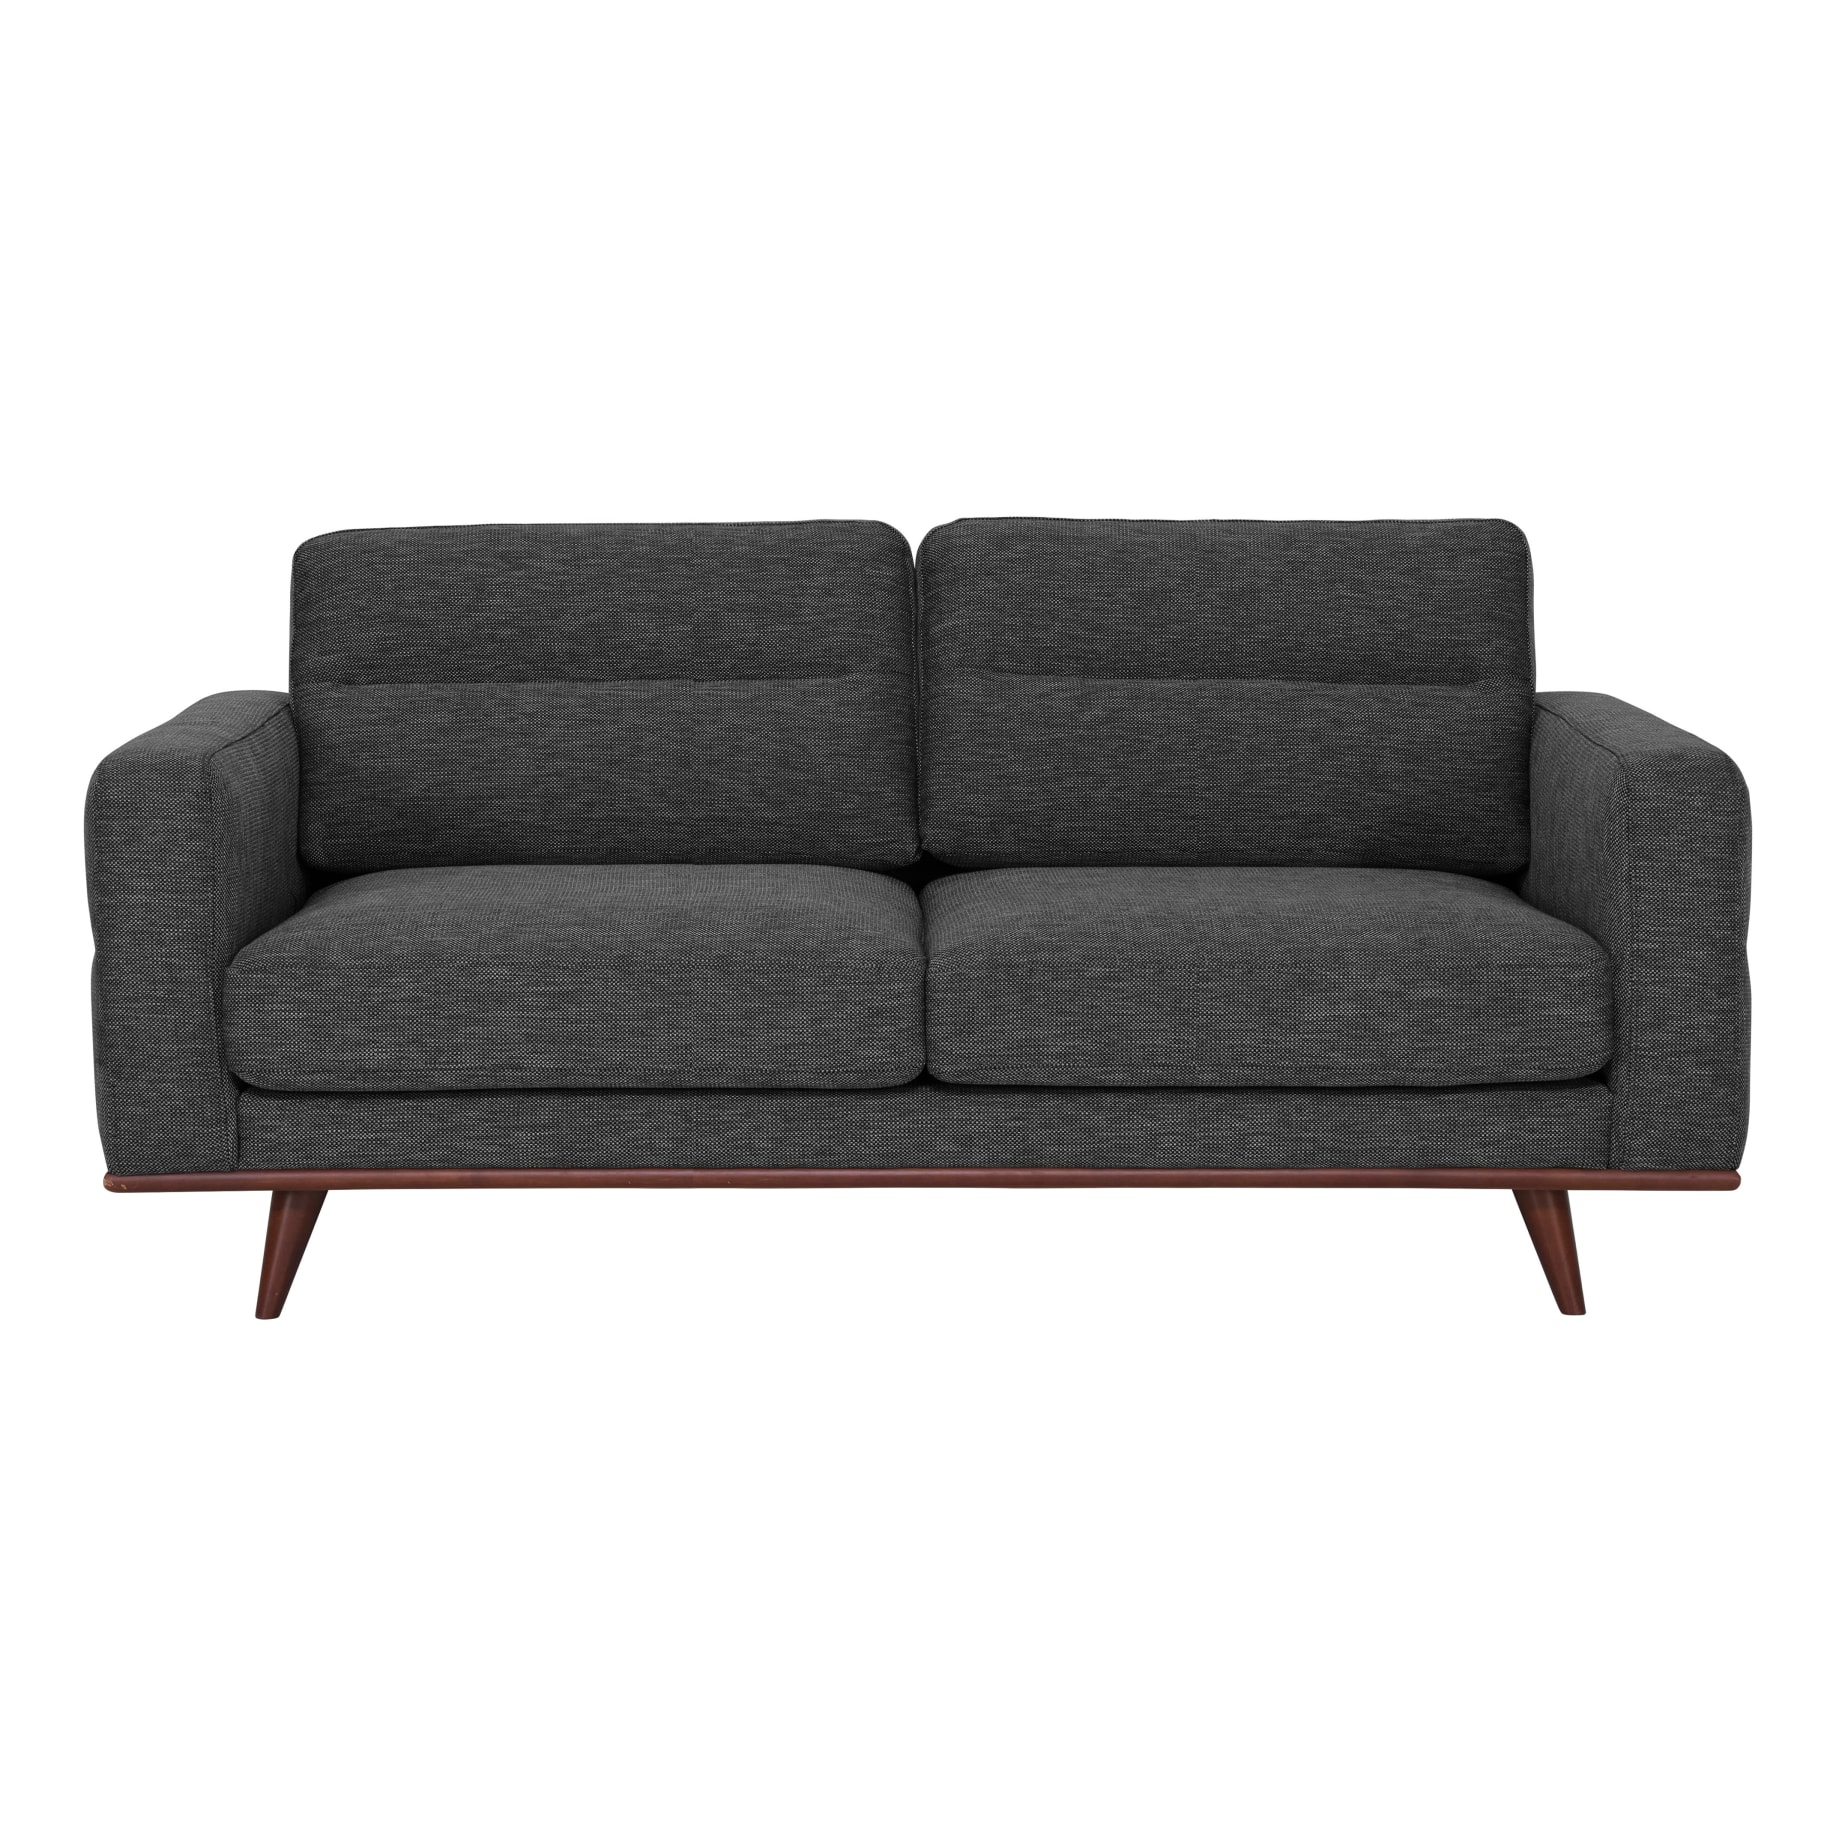 Astrid 2.5 Seater Sofa in Talent Charcoal